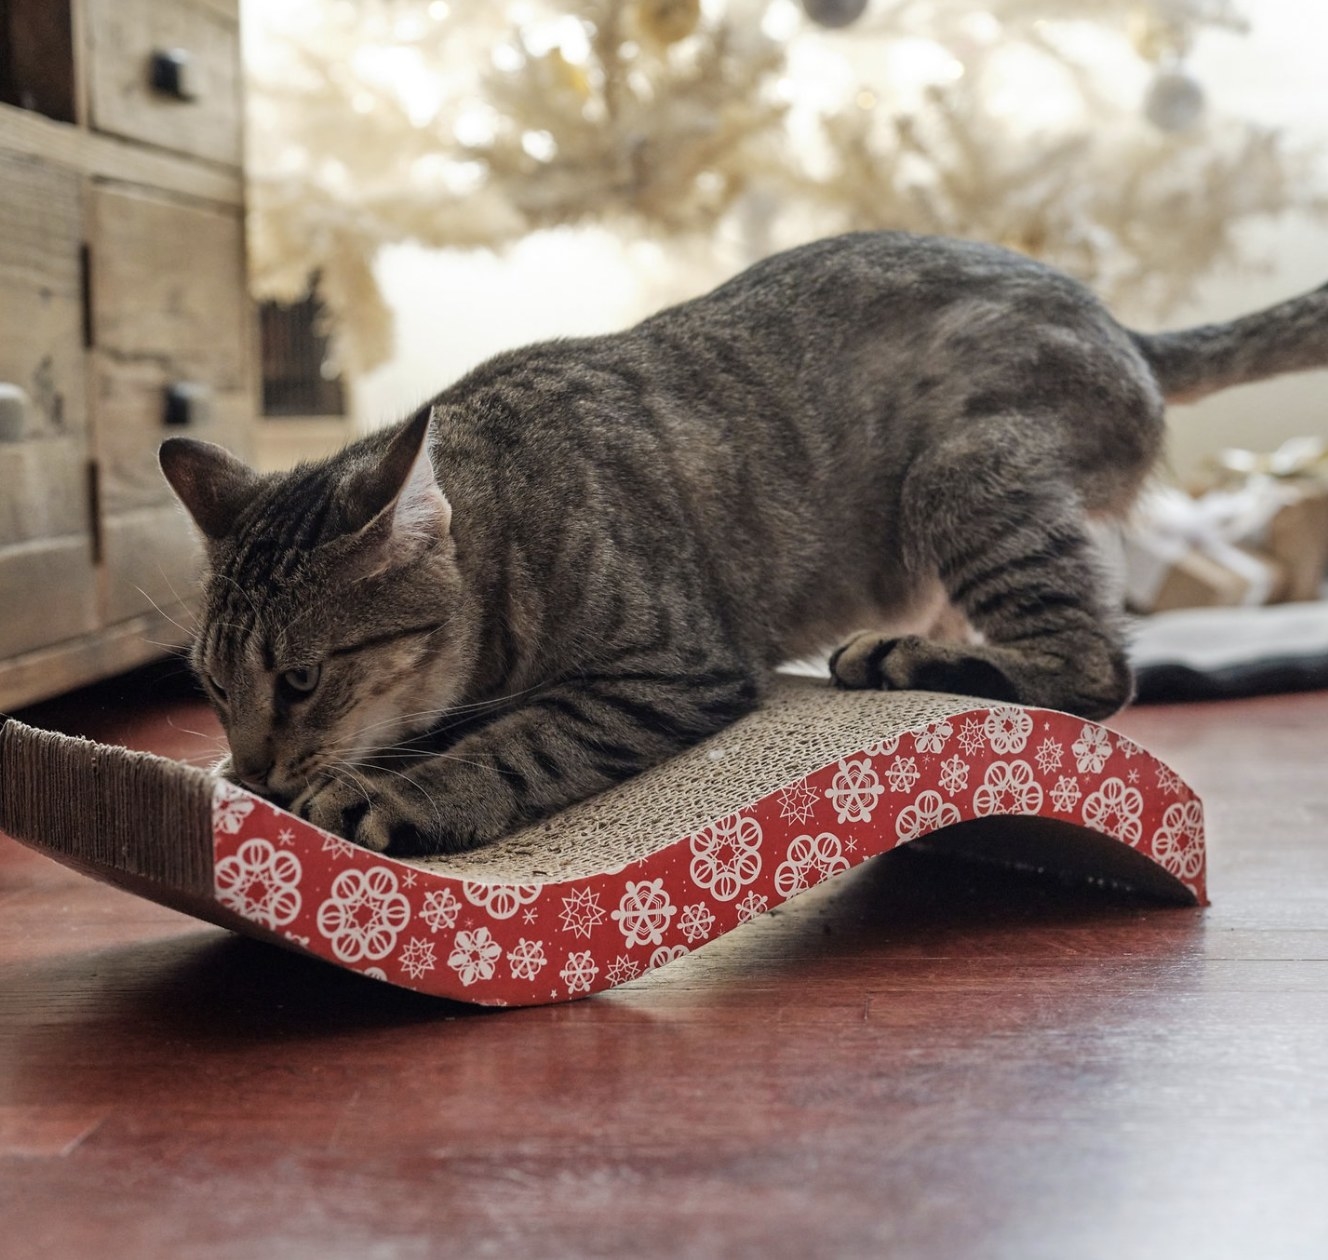 a cat scratching in the post that has red and white snowflake designs on the side